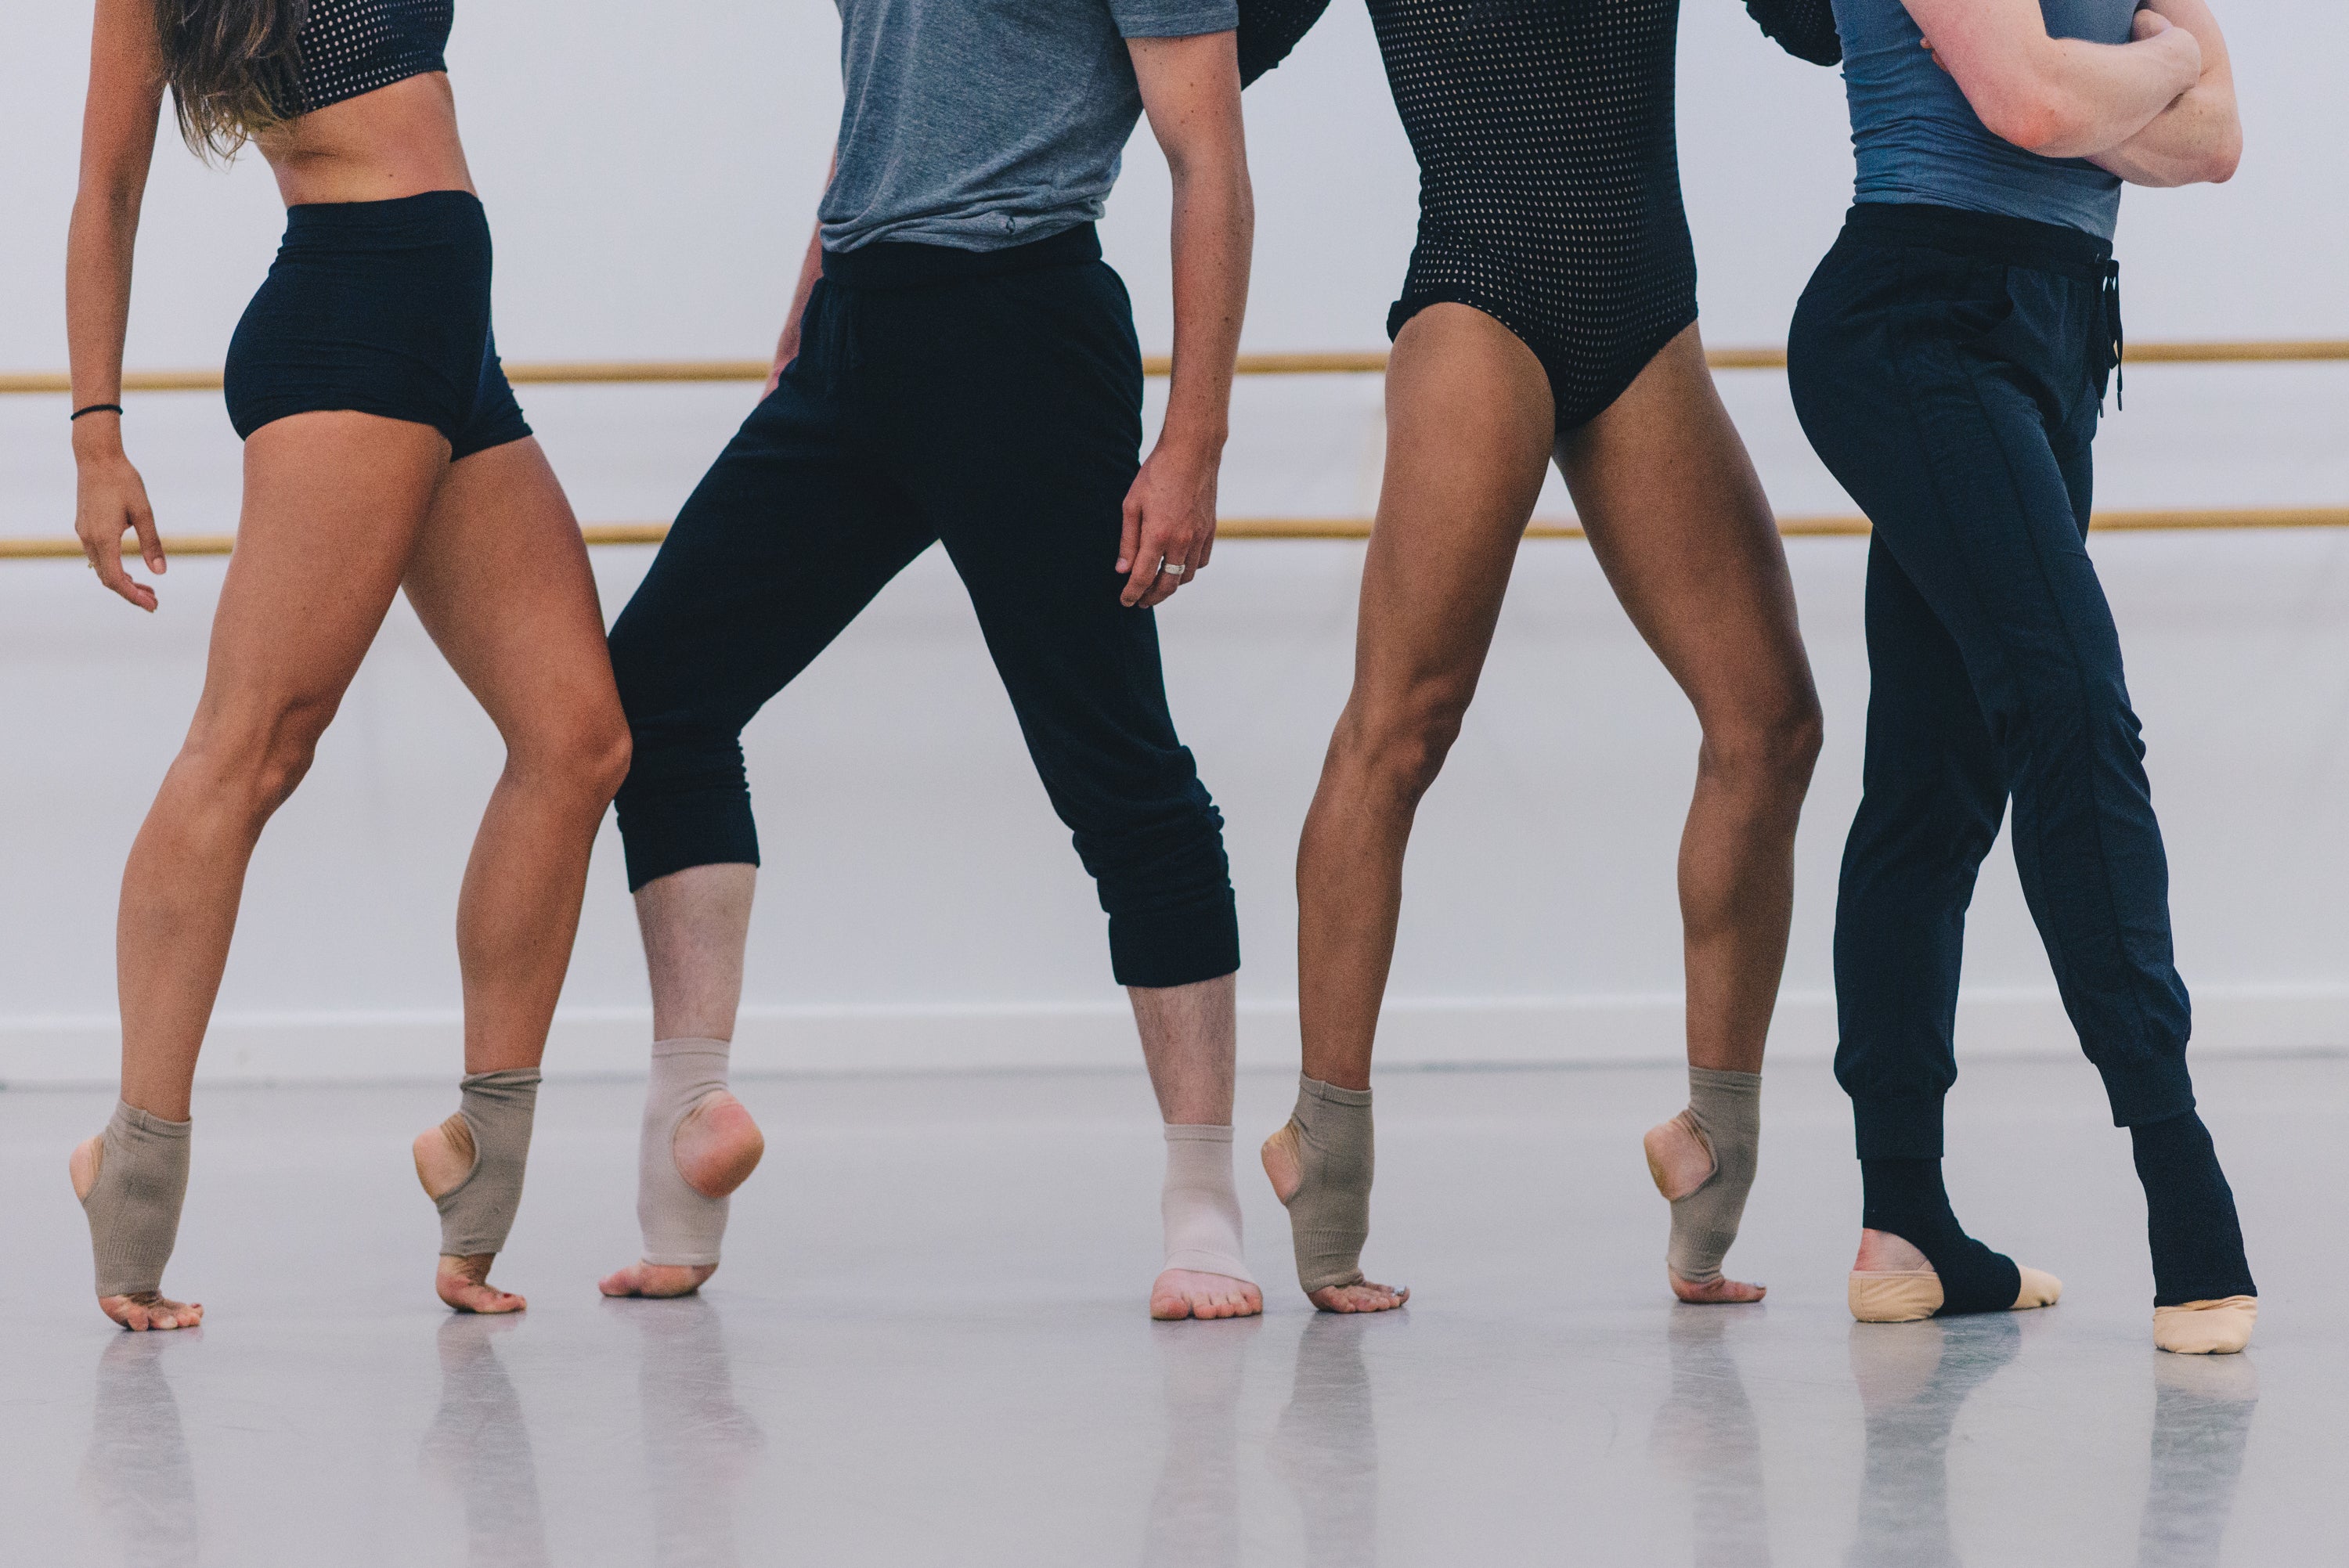 How To Choose The Best Contemporary Dance Socks